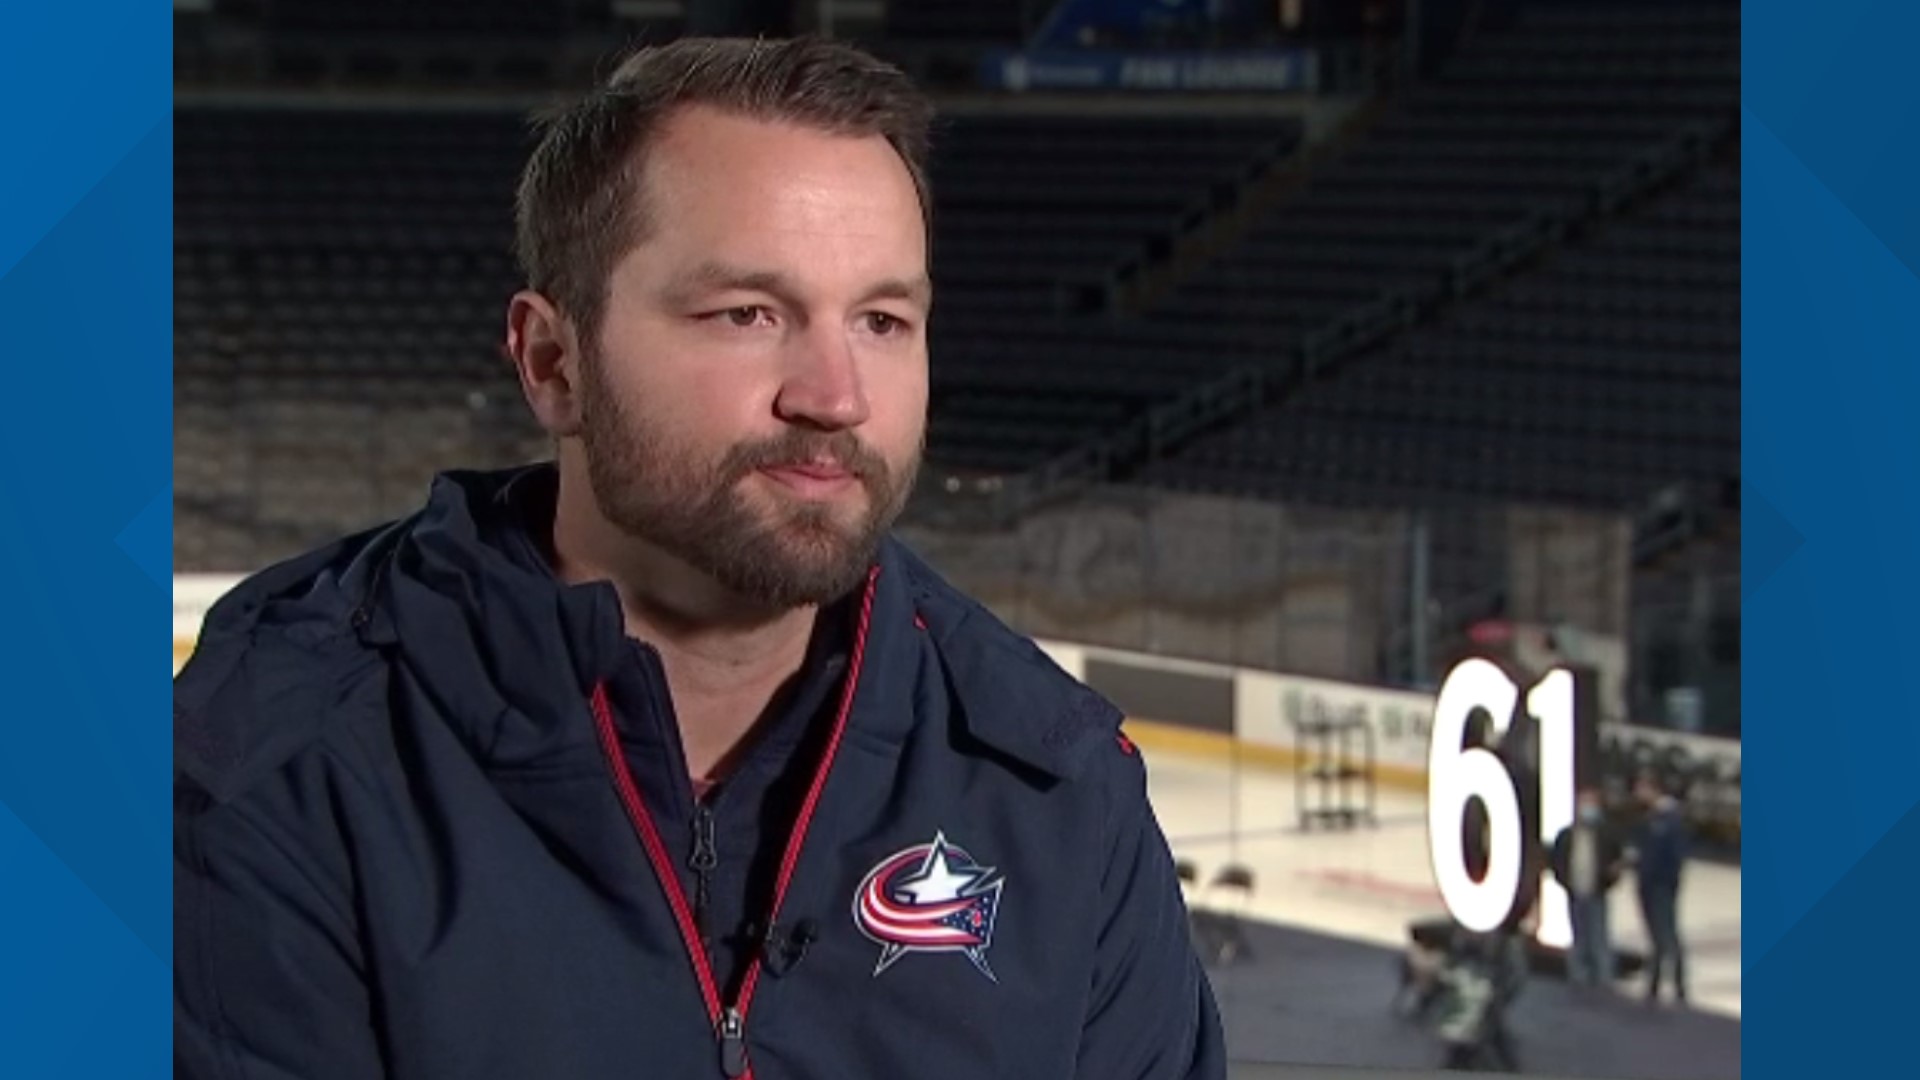 Rick Nash, who leads Columbus in games played, goals, assists and points will have his number 61 raised to the rafters at Nationwide Arena on Saturday.